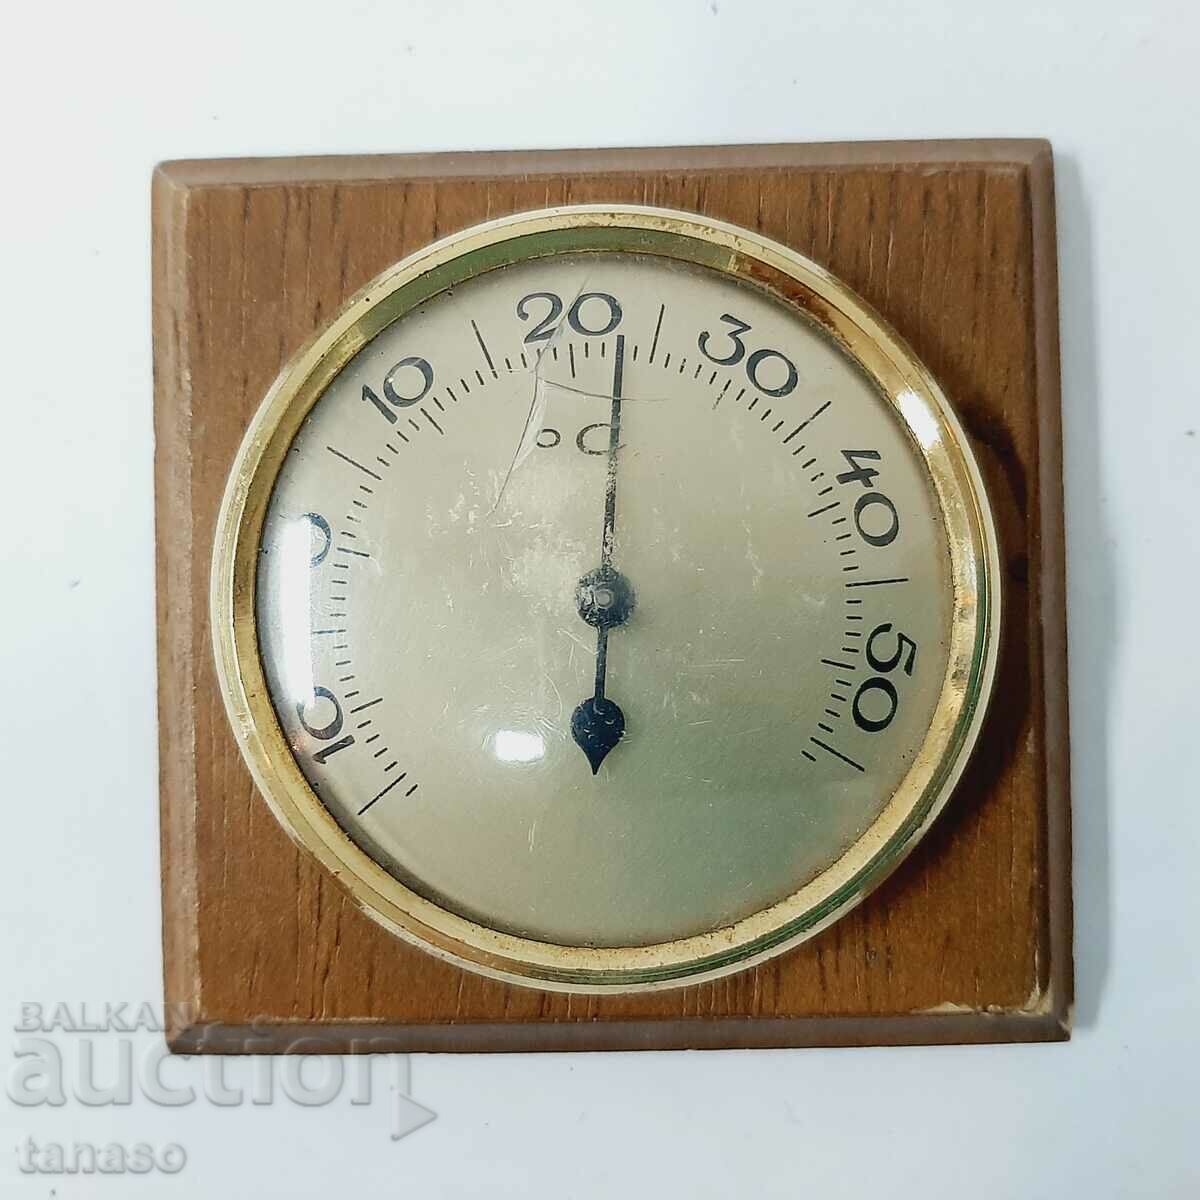 Old Round Mechanical Thermometer(12.3)